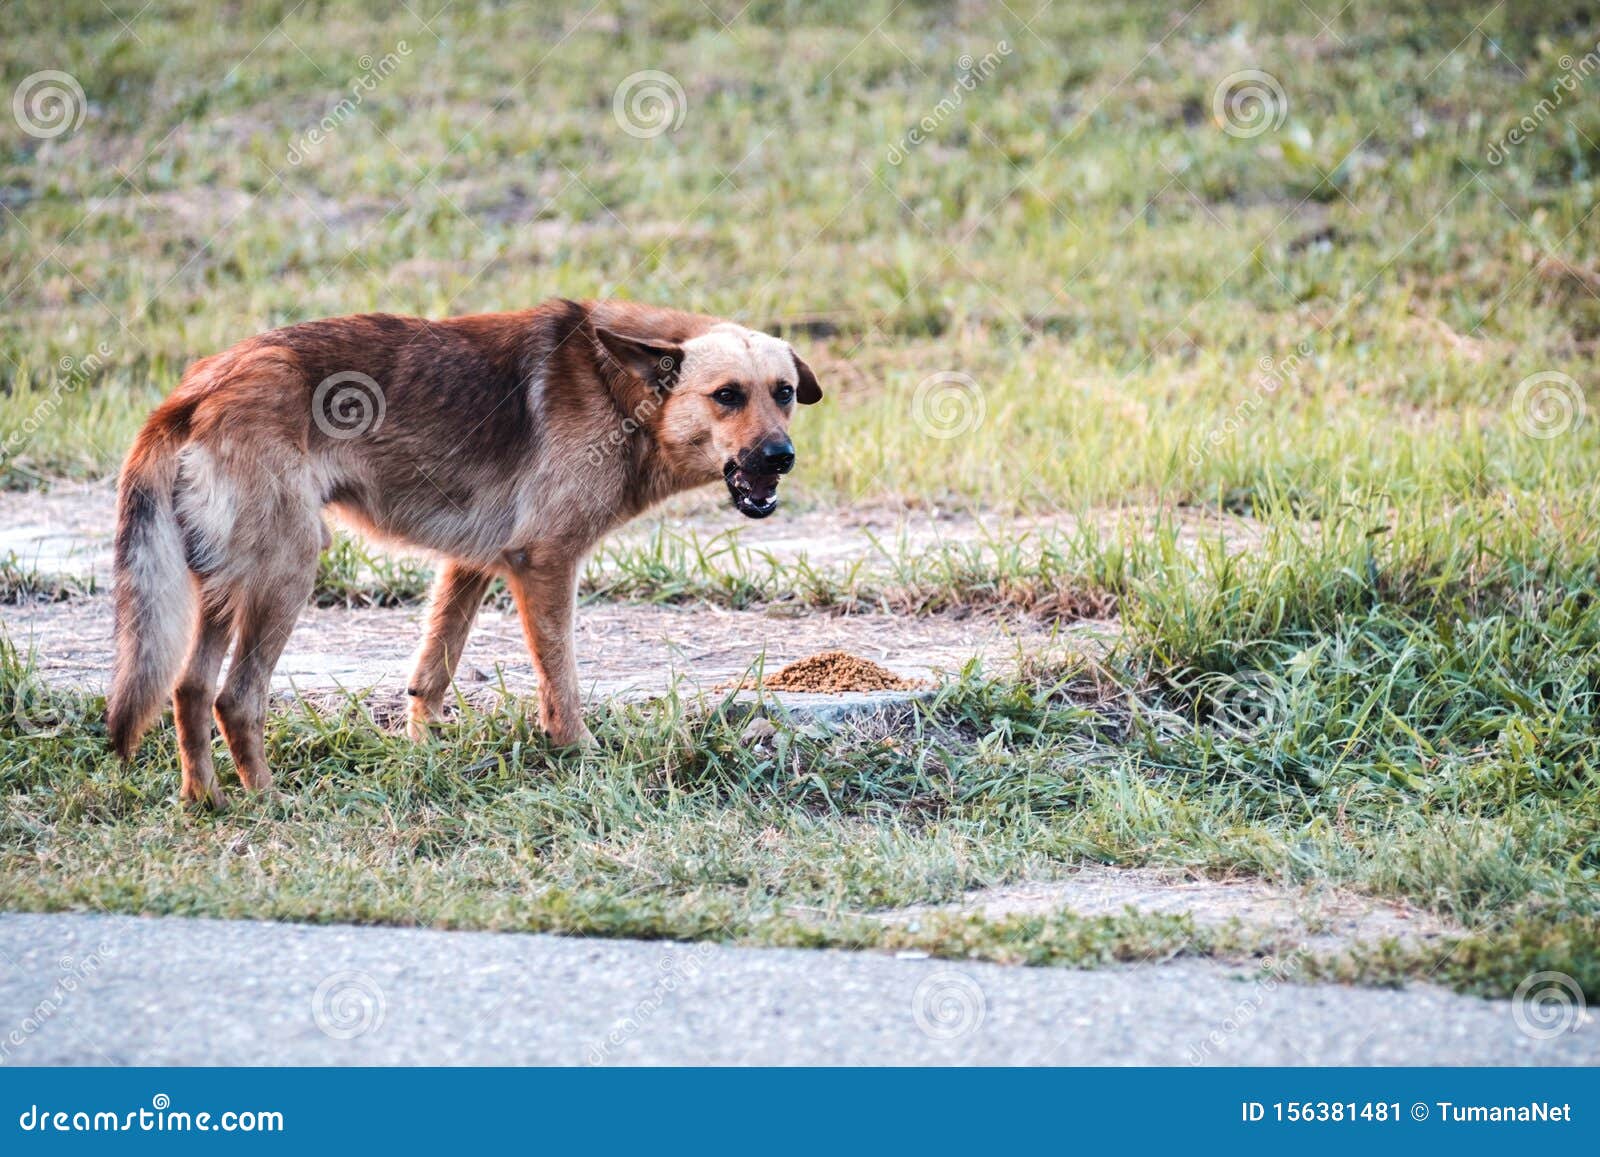 Hungry Stray Aggressive Dog in Clearing. Nearby is Pile of Dog Food. Help  Stray Animals. Stock Image - Image of grain, brown: 156381481